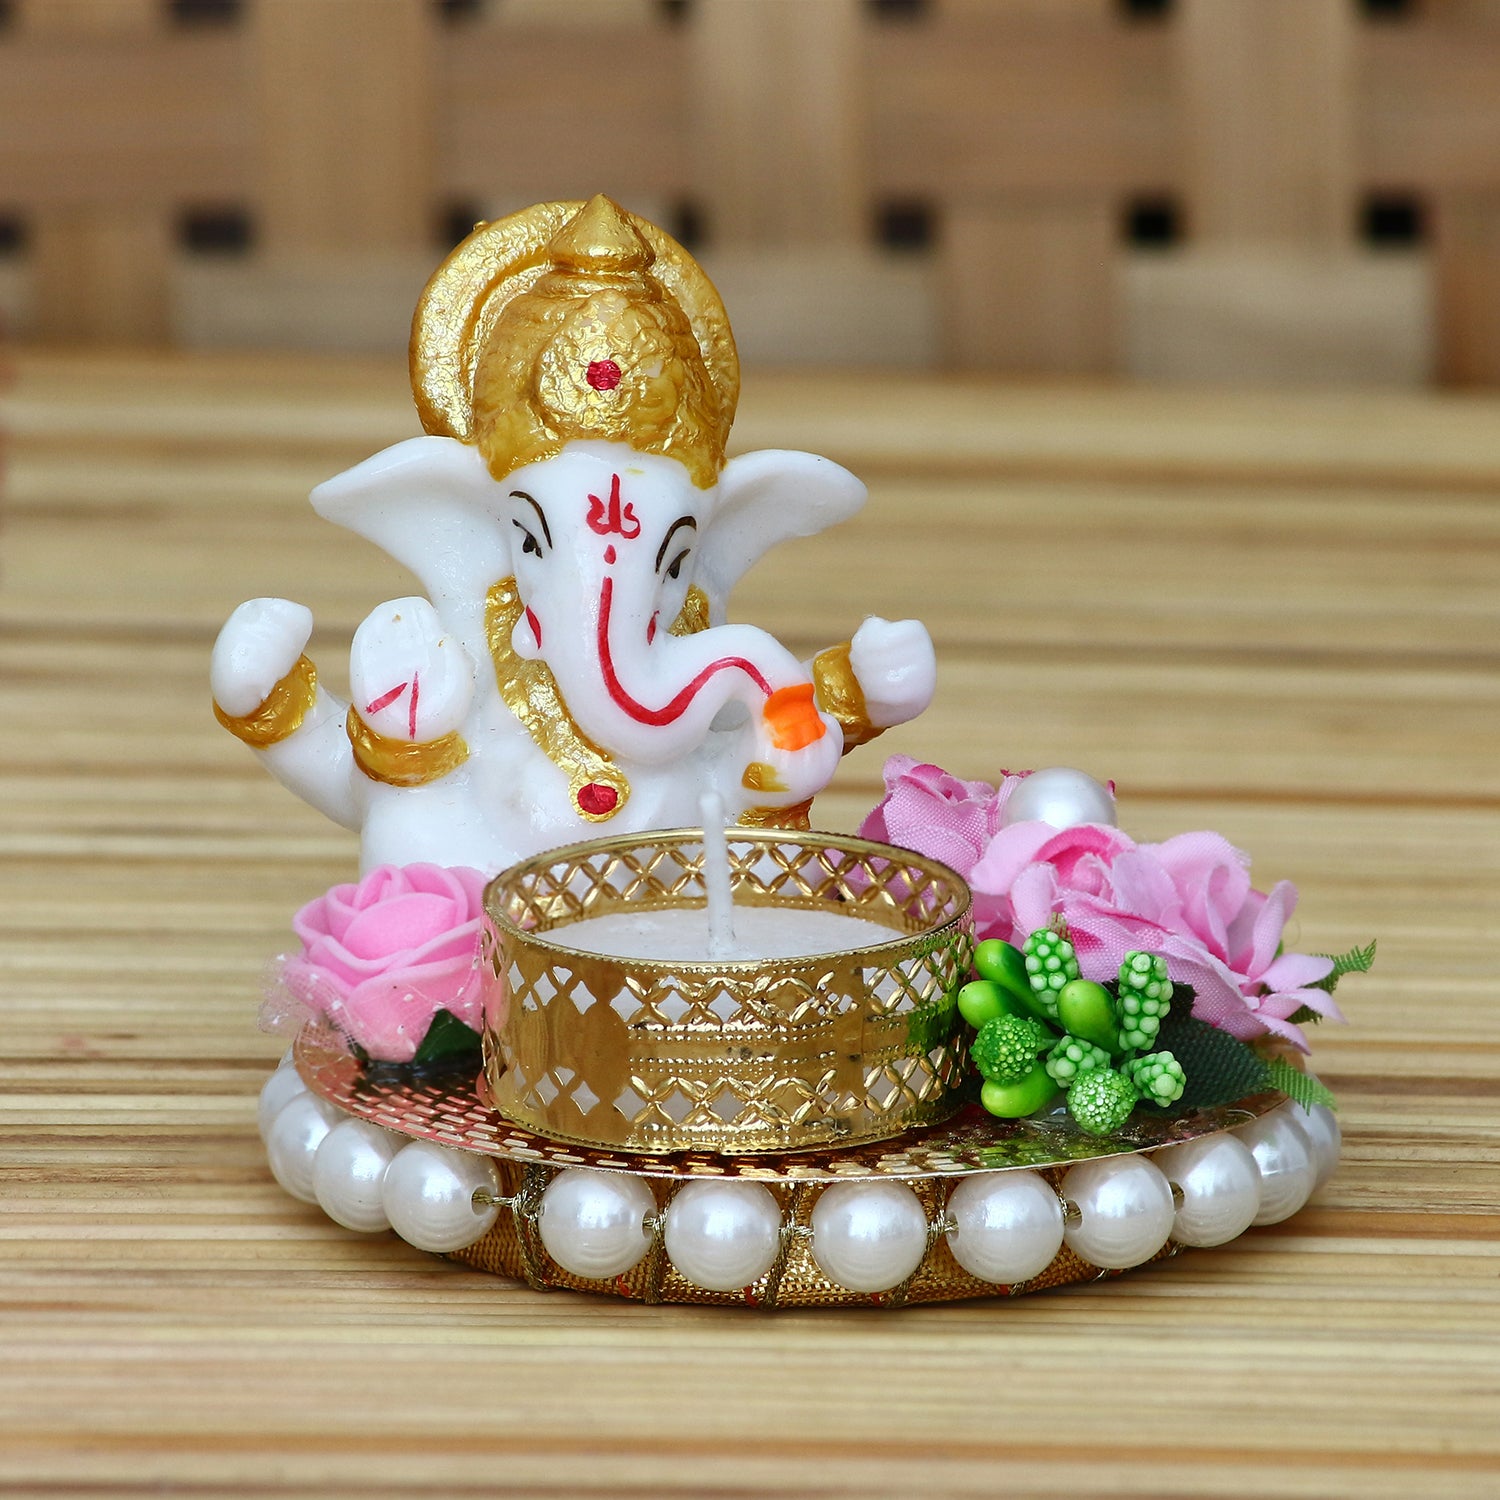 Polyresin Lord Ganesha Idol on Decorative Metal Plate with Tea Light Holder (Pink, Green and White) 1